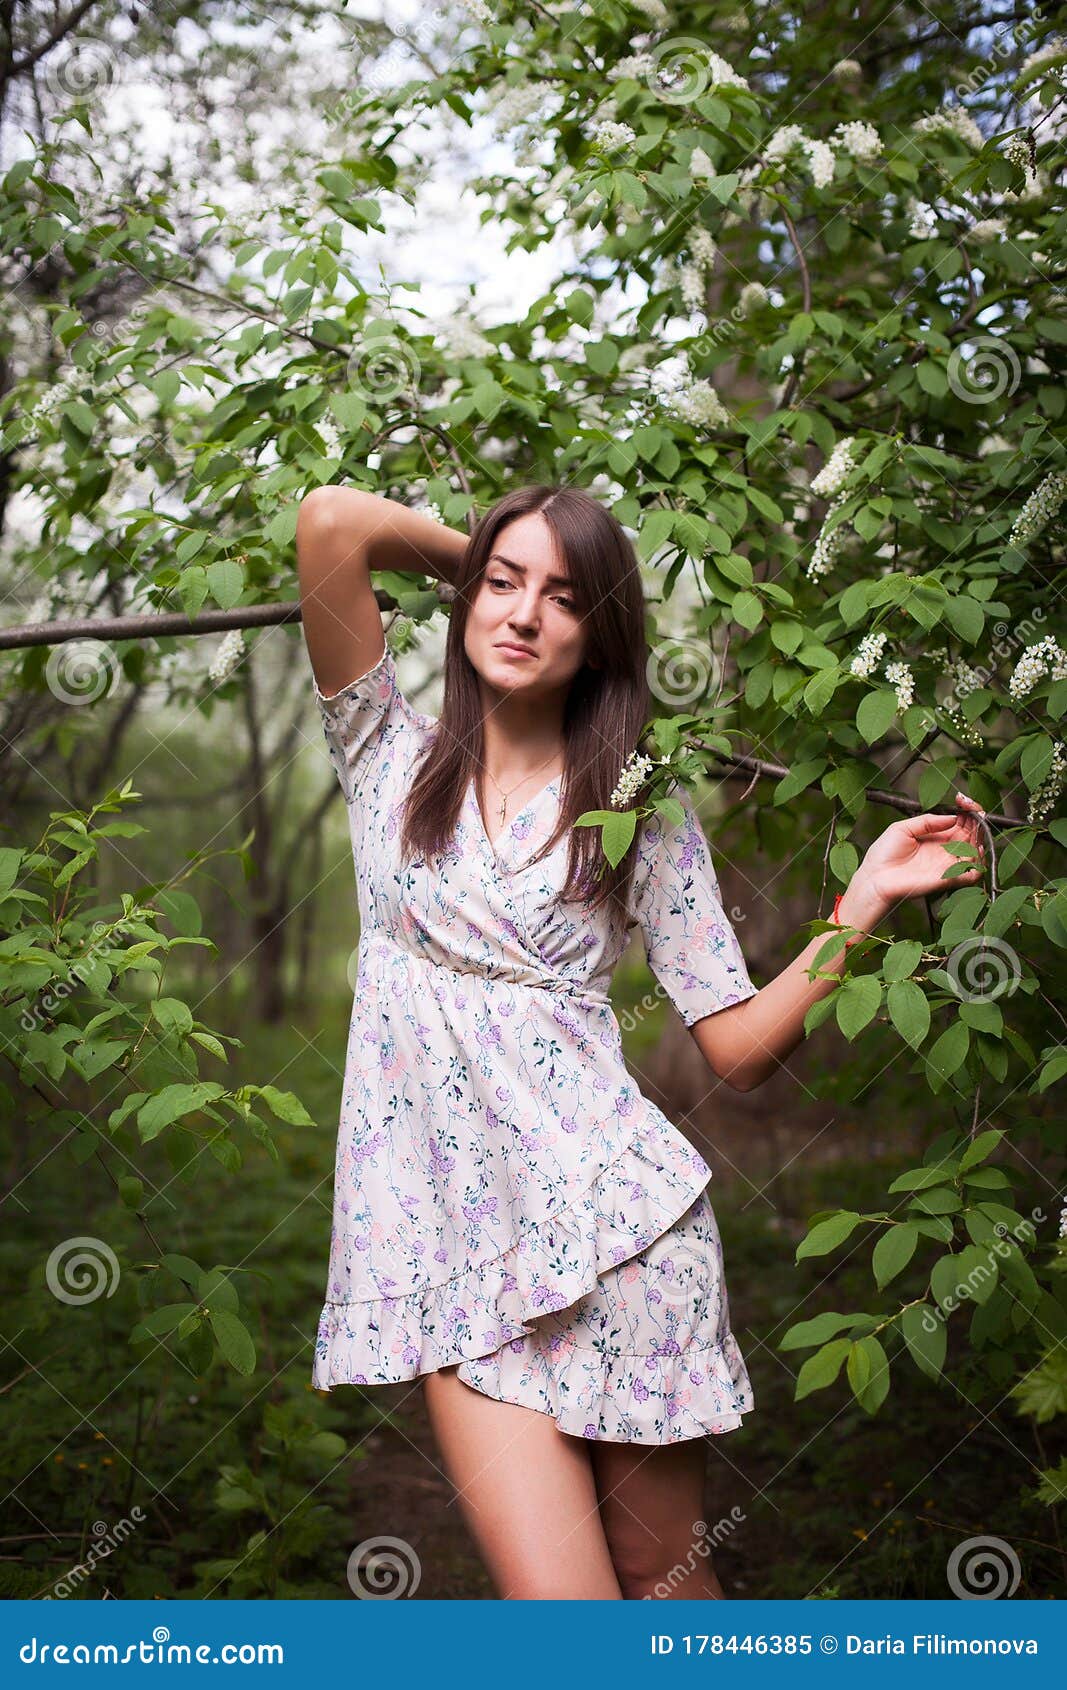 Young Girl in Spring Blooming Garden Stock Image - Image of young ...